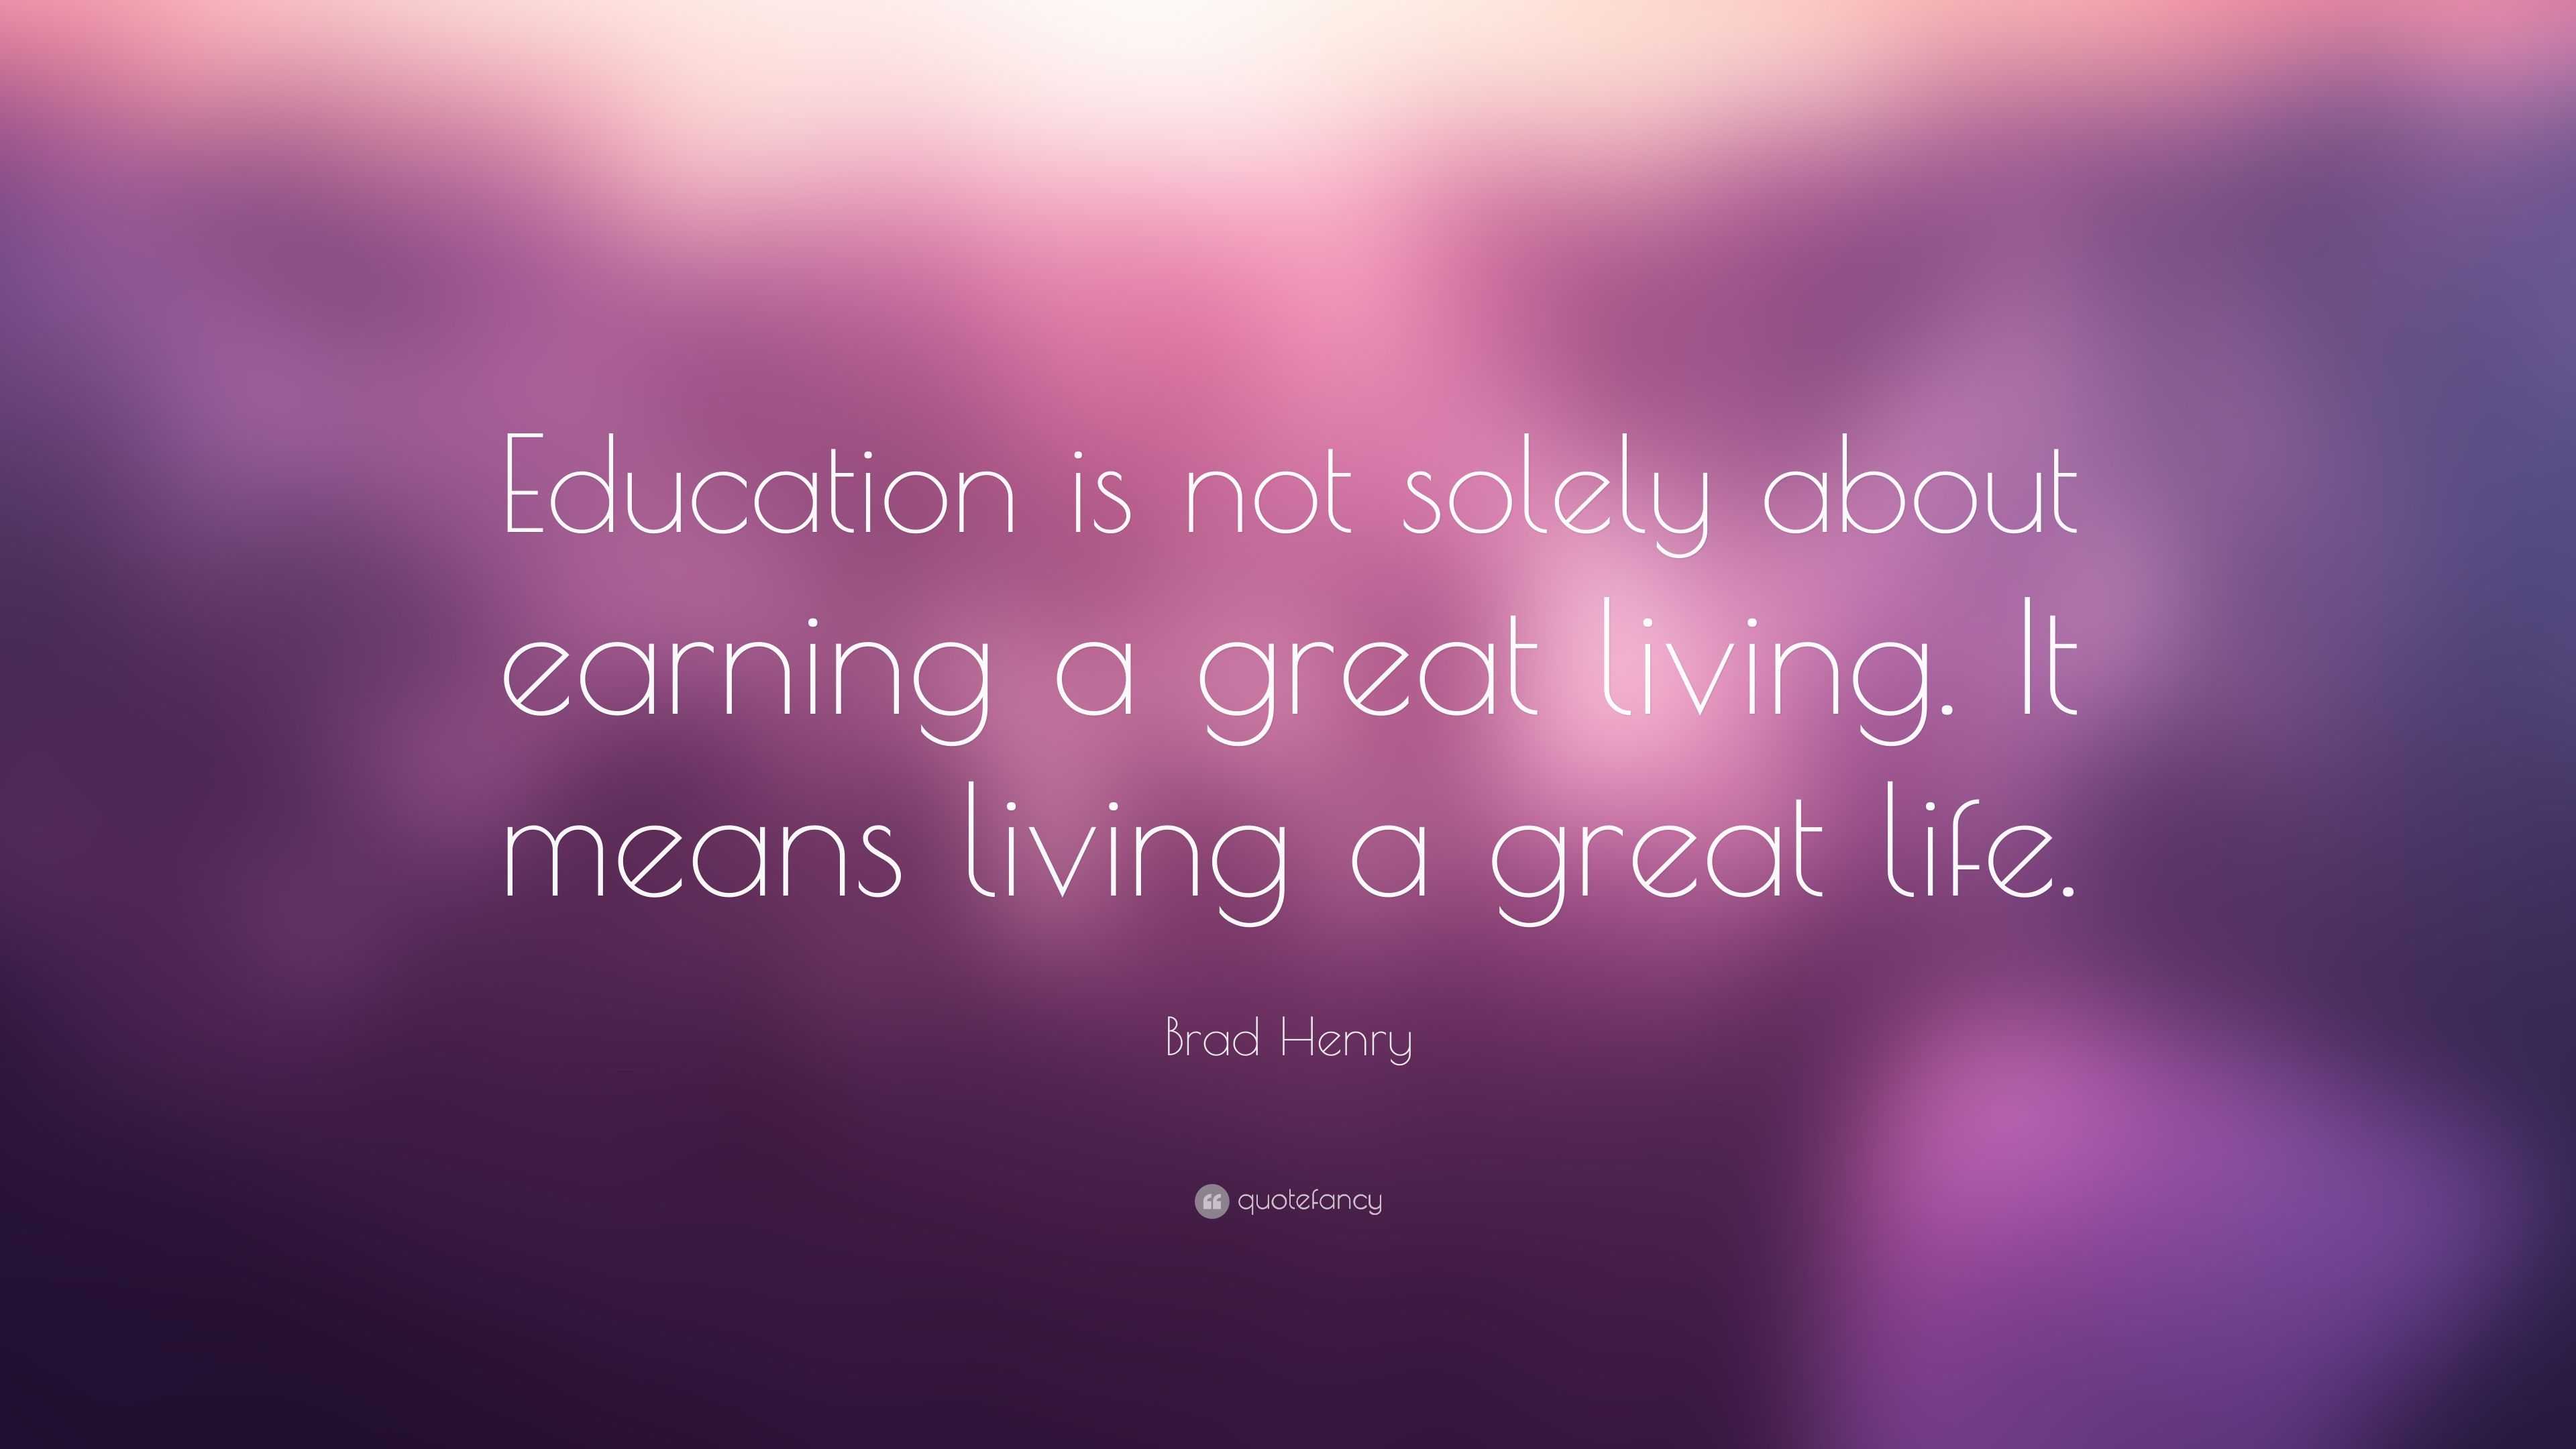 Education is not merely a means for earning - Quote